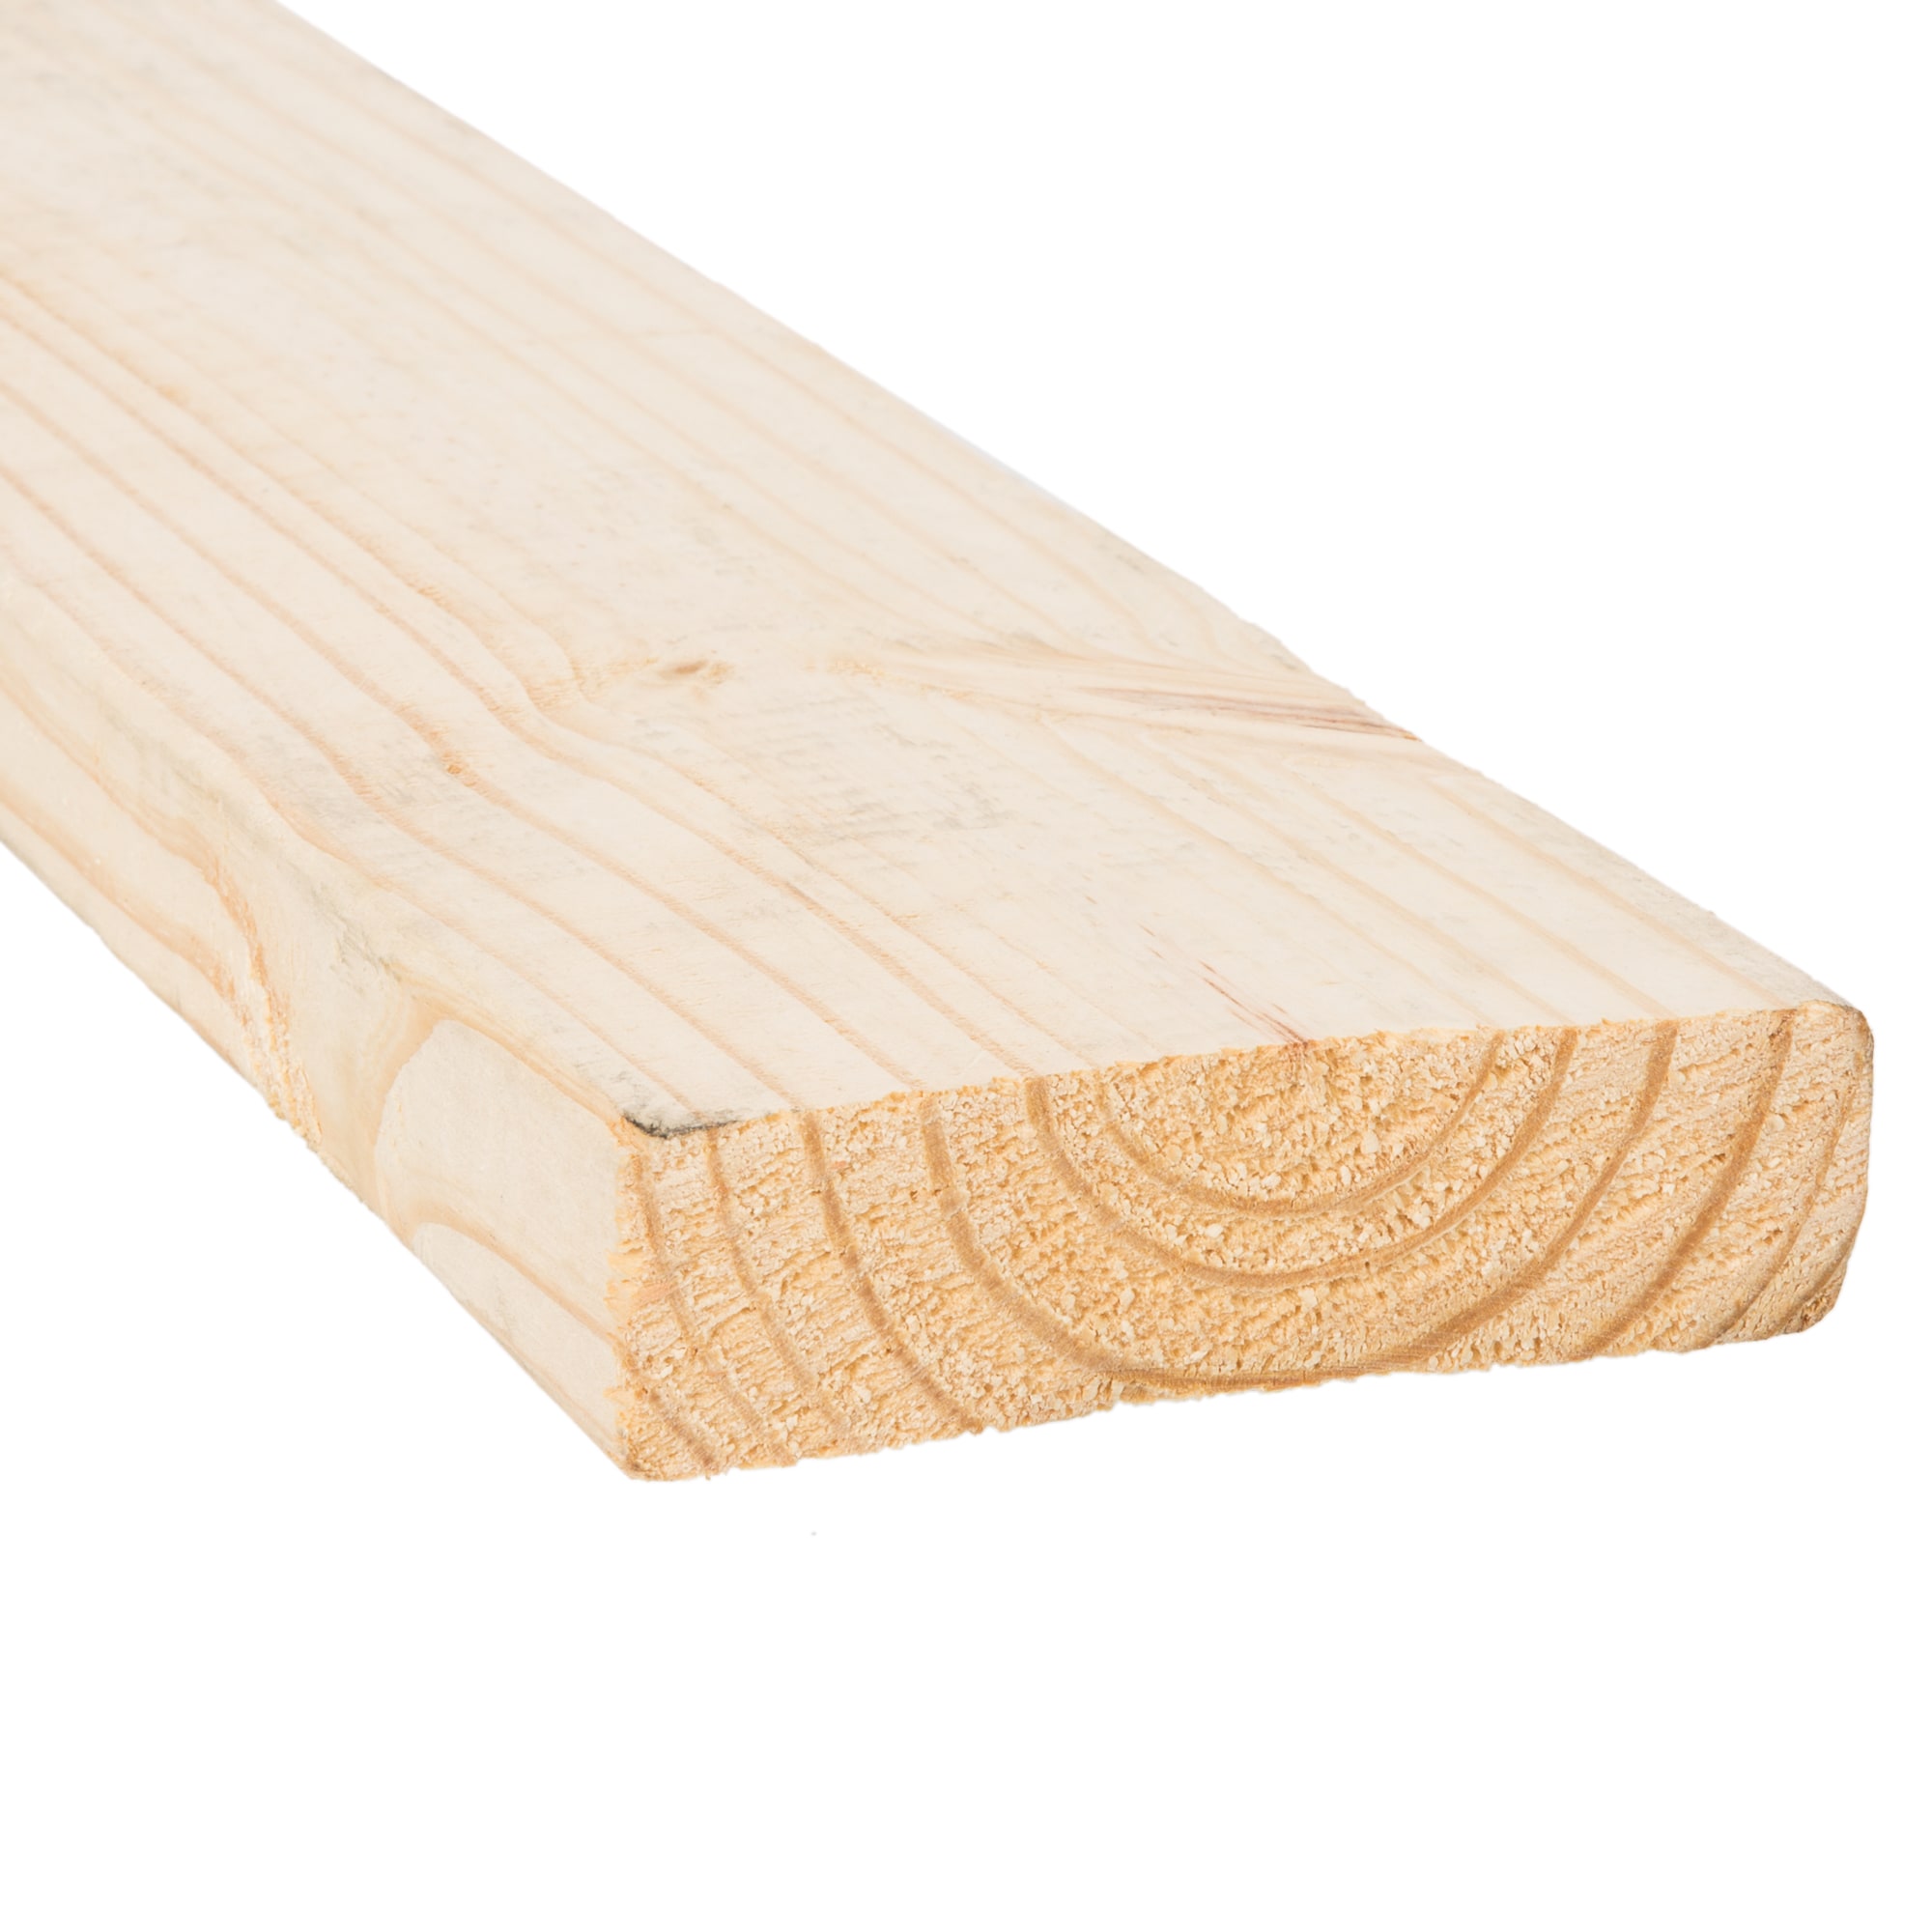 2 in. x 4 in. x 4 ft. Premium Southern Yellow Pine Dimensional Lumber  271736 - The Home Depot